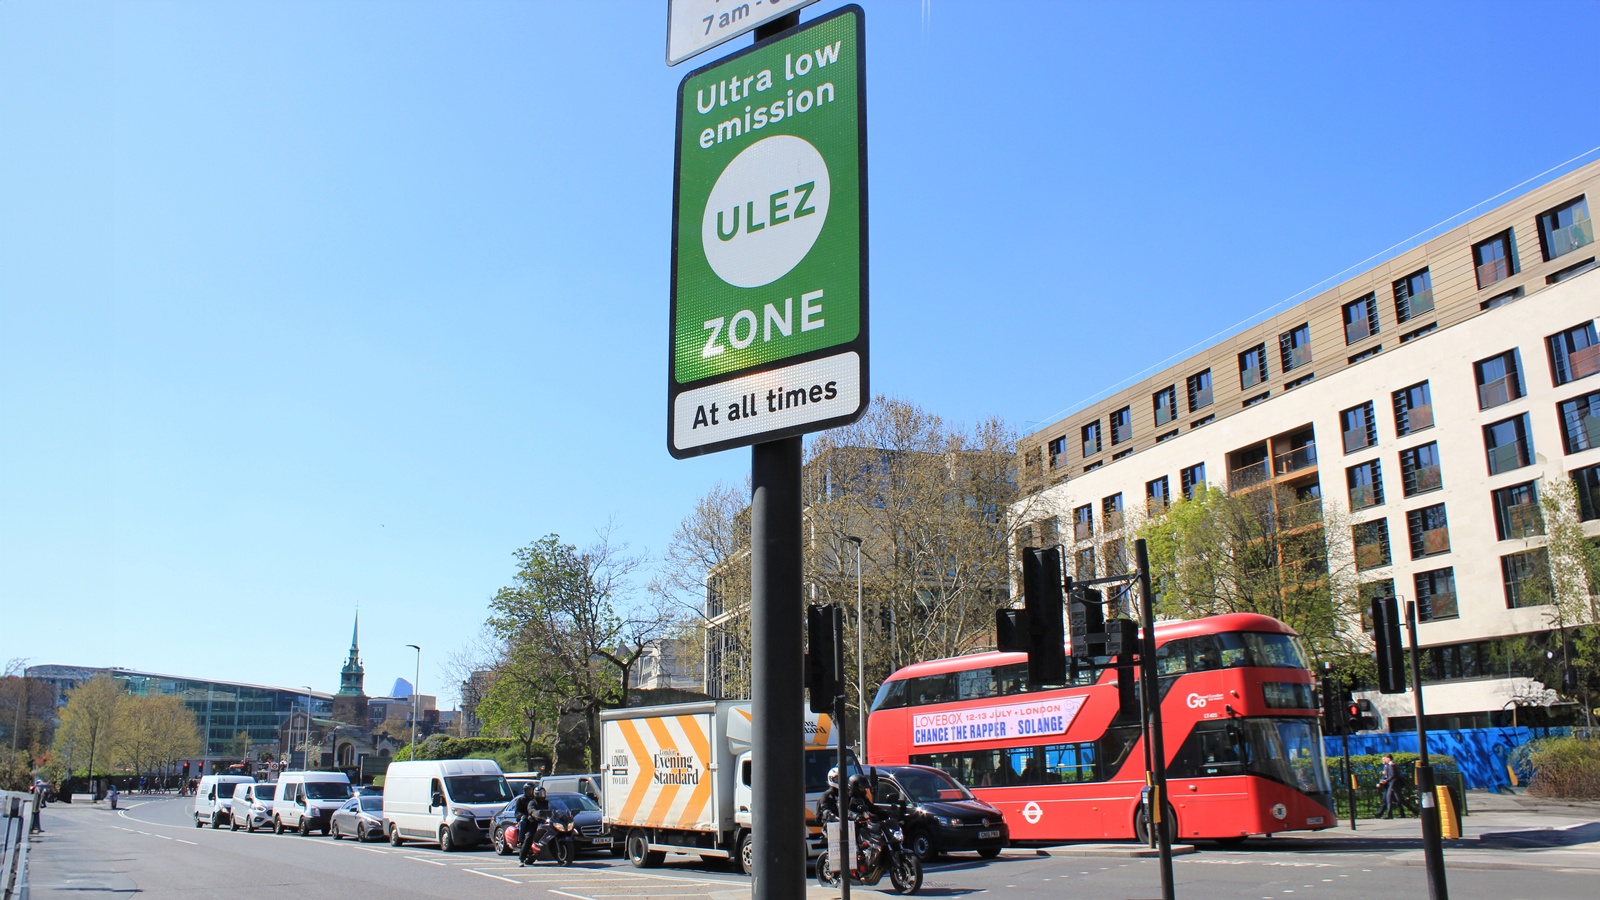 ULEZ expansion sees London’s air quality improve faster than the rest of England